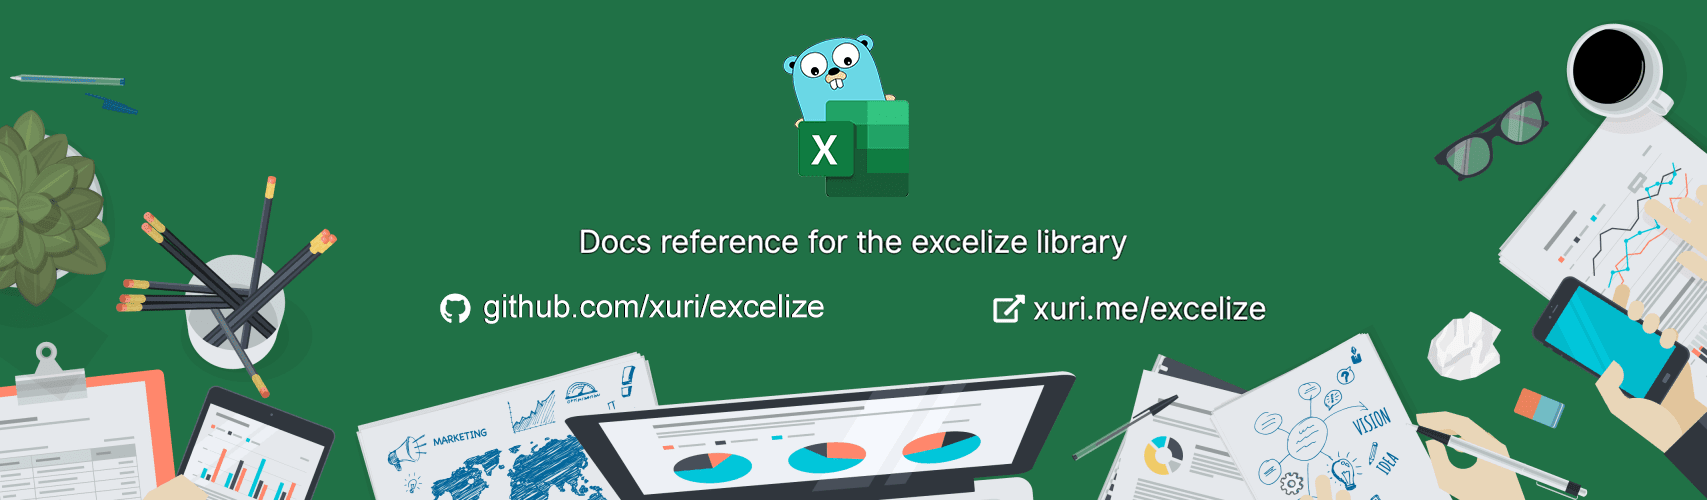 Docs reference for the excelize library